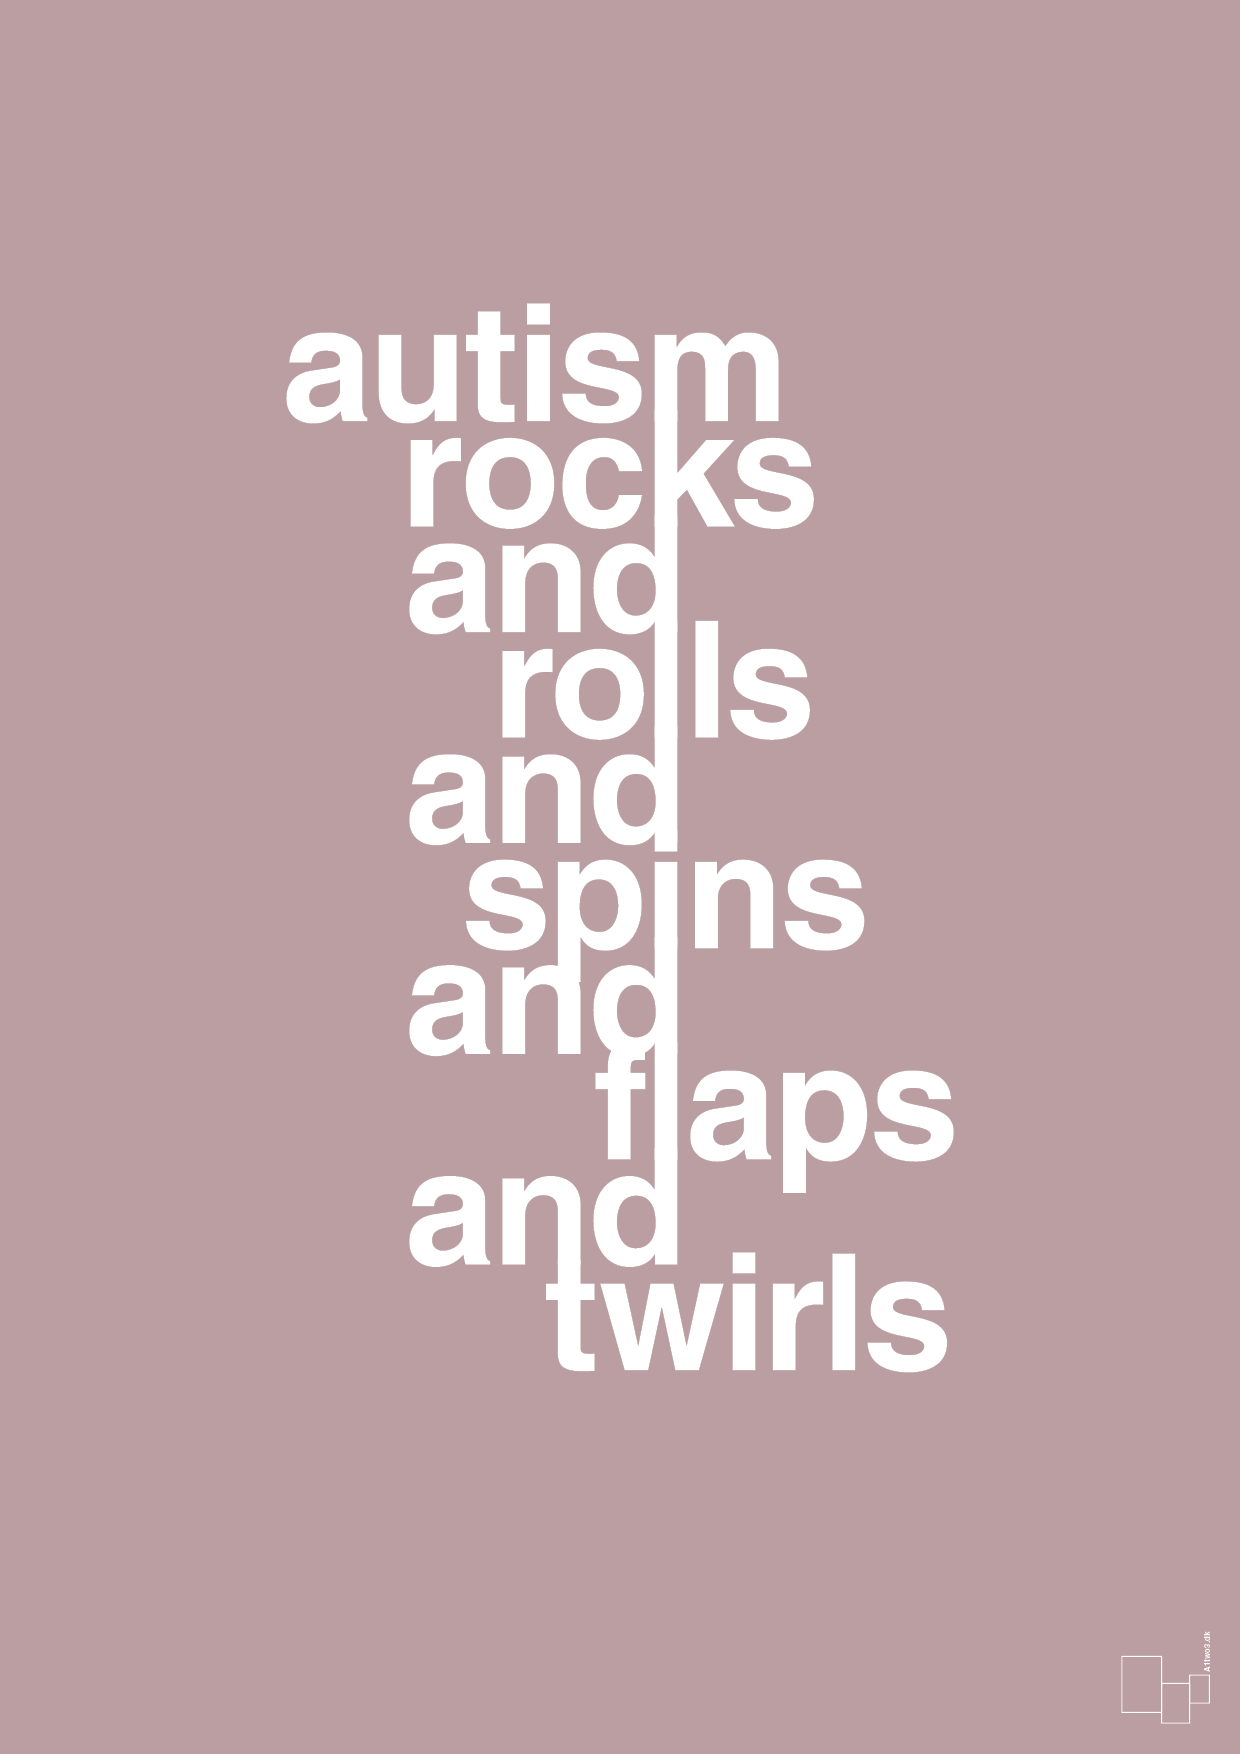 autism rocks and rolls and spins and flaps and twirls - Plakat med Samfund i Light Rose